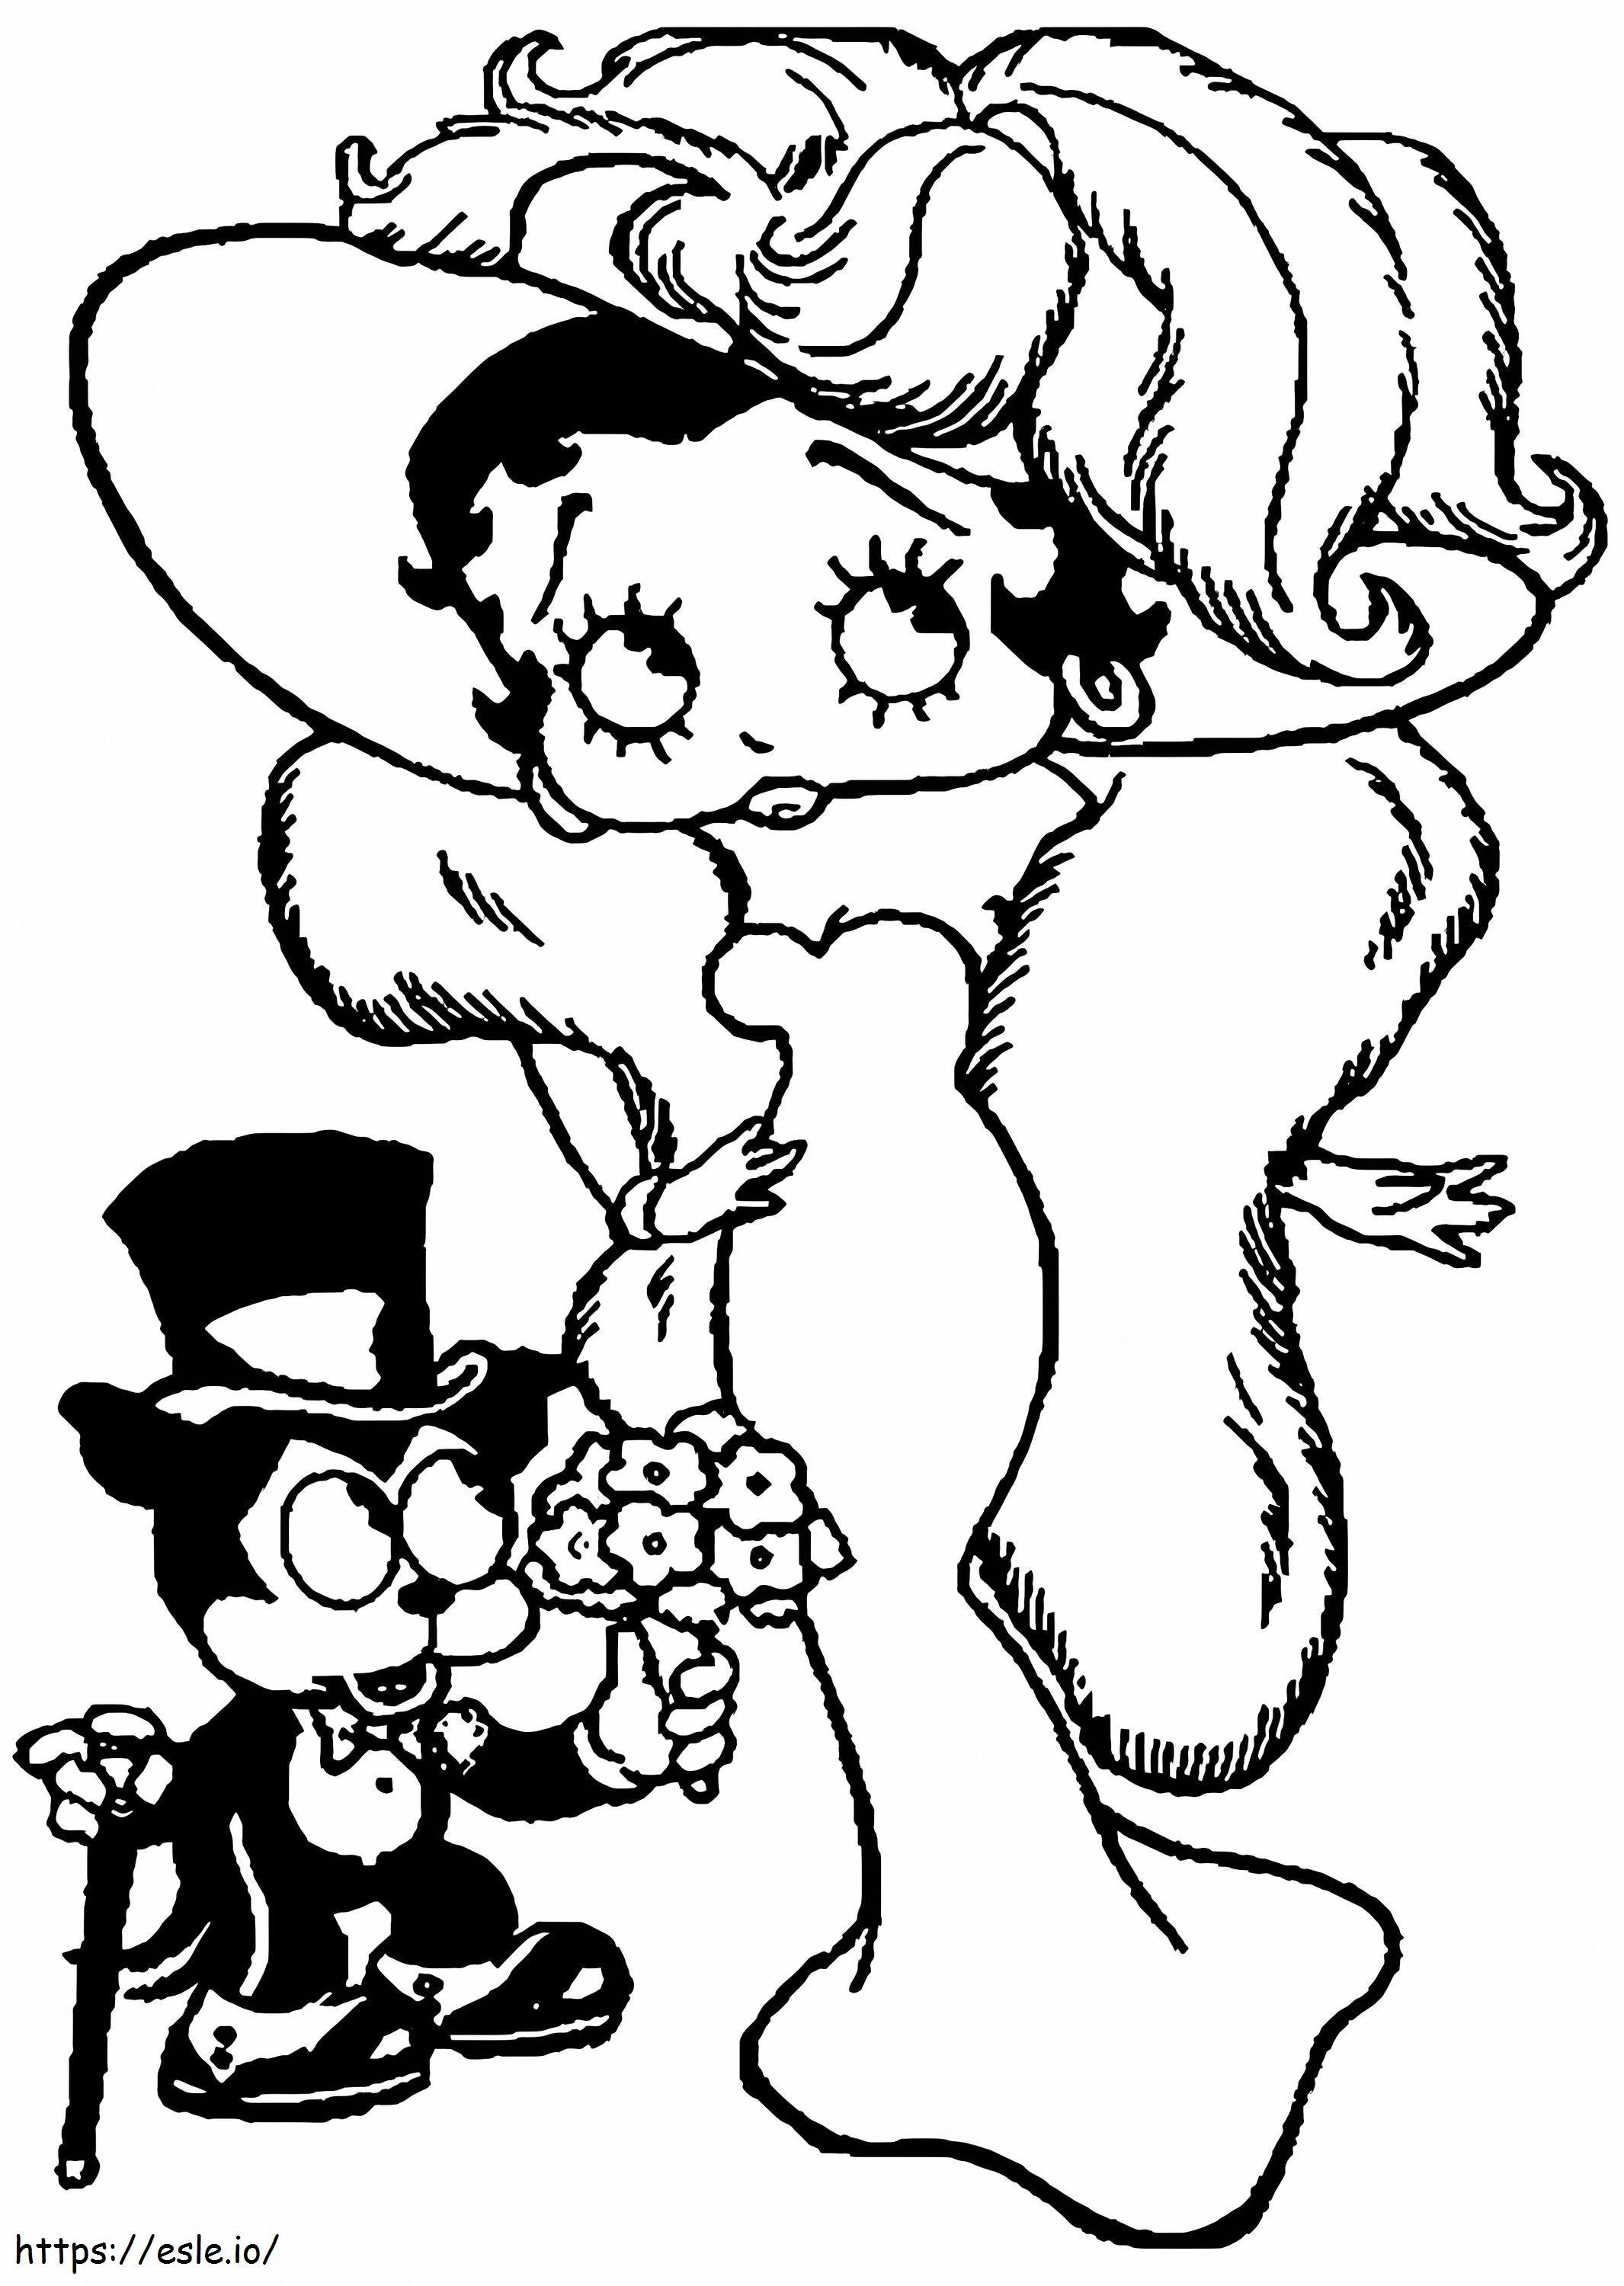 Lady Betty Boop coloring page